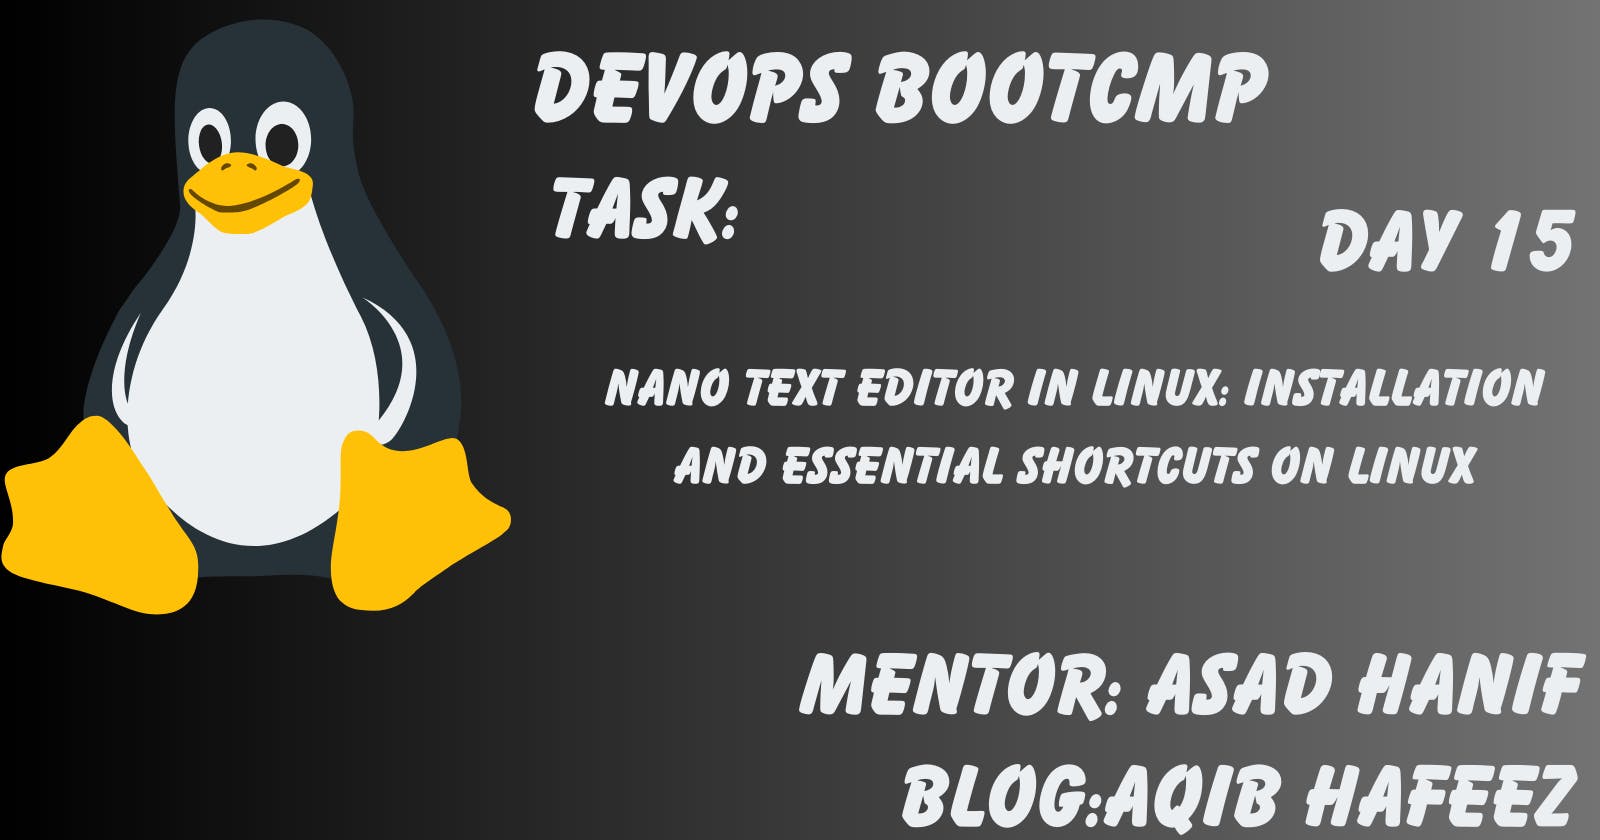 Day 15 || Introduction to Nano Text Editor in Linux, Its Role in DevOps, Installation on Ubuntu, CentOS, and RHEL, and Essential Shortcut Keys